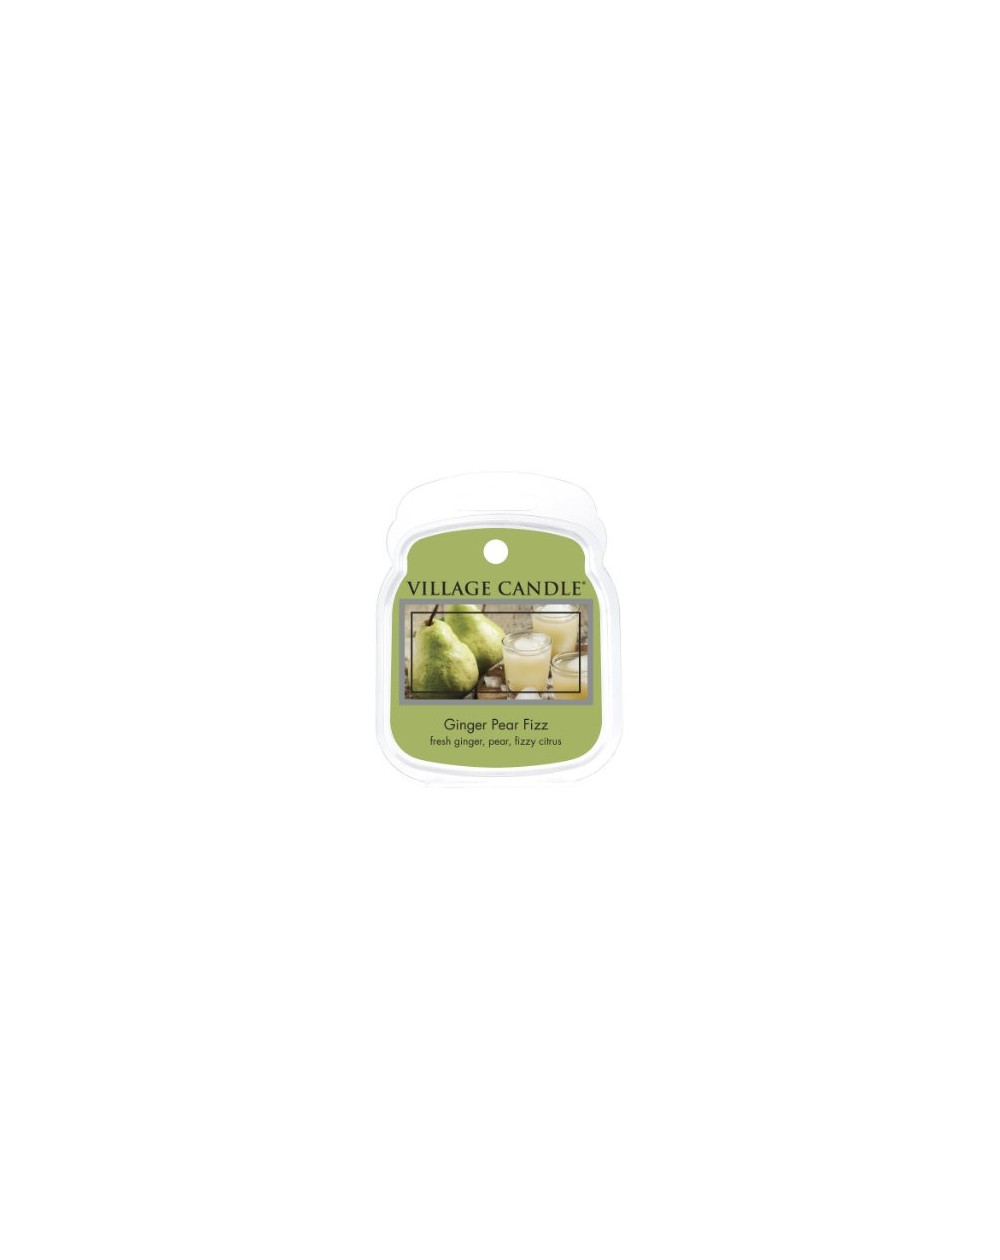 CIRE VILLAGE CANDLE GINGER PEAR FIZZ